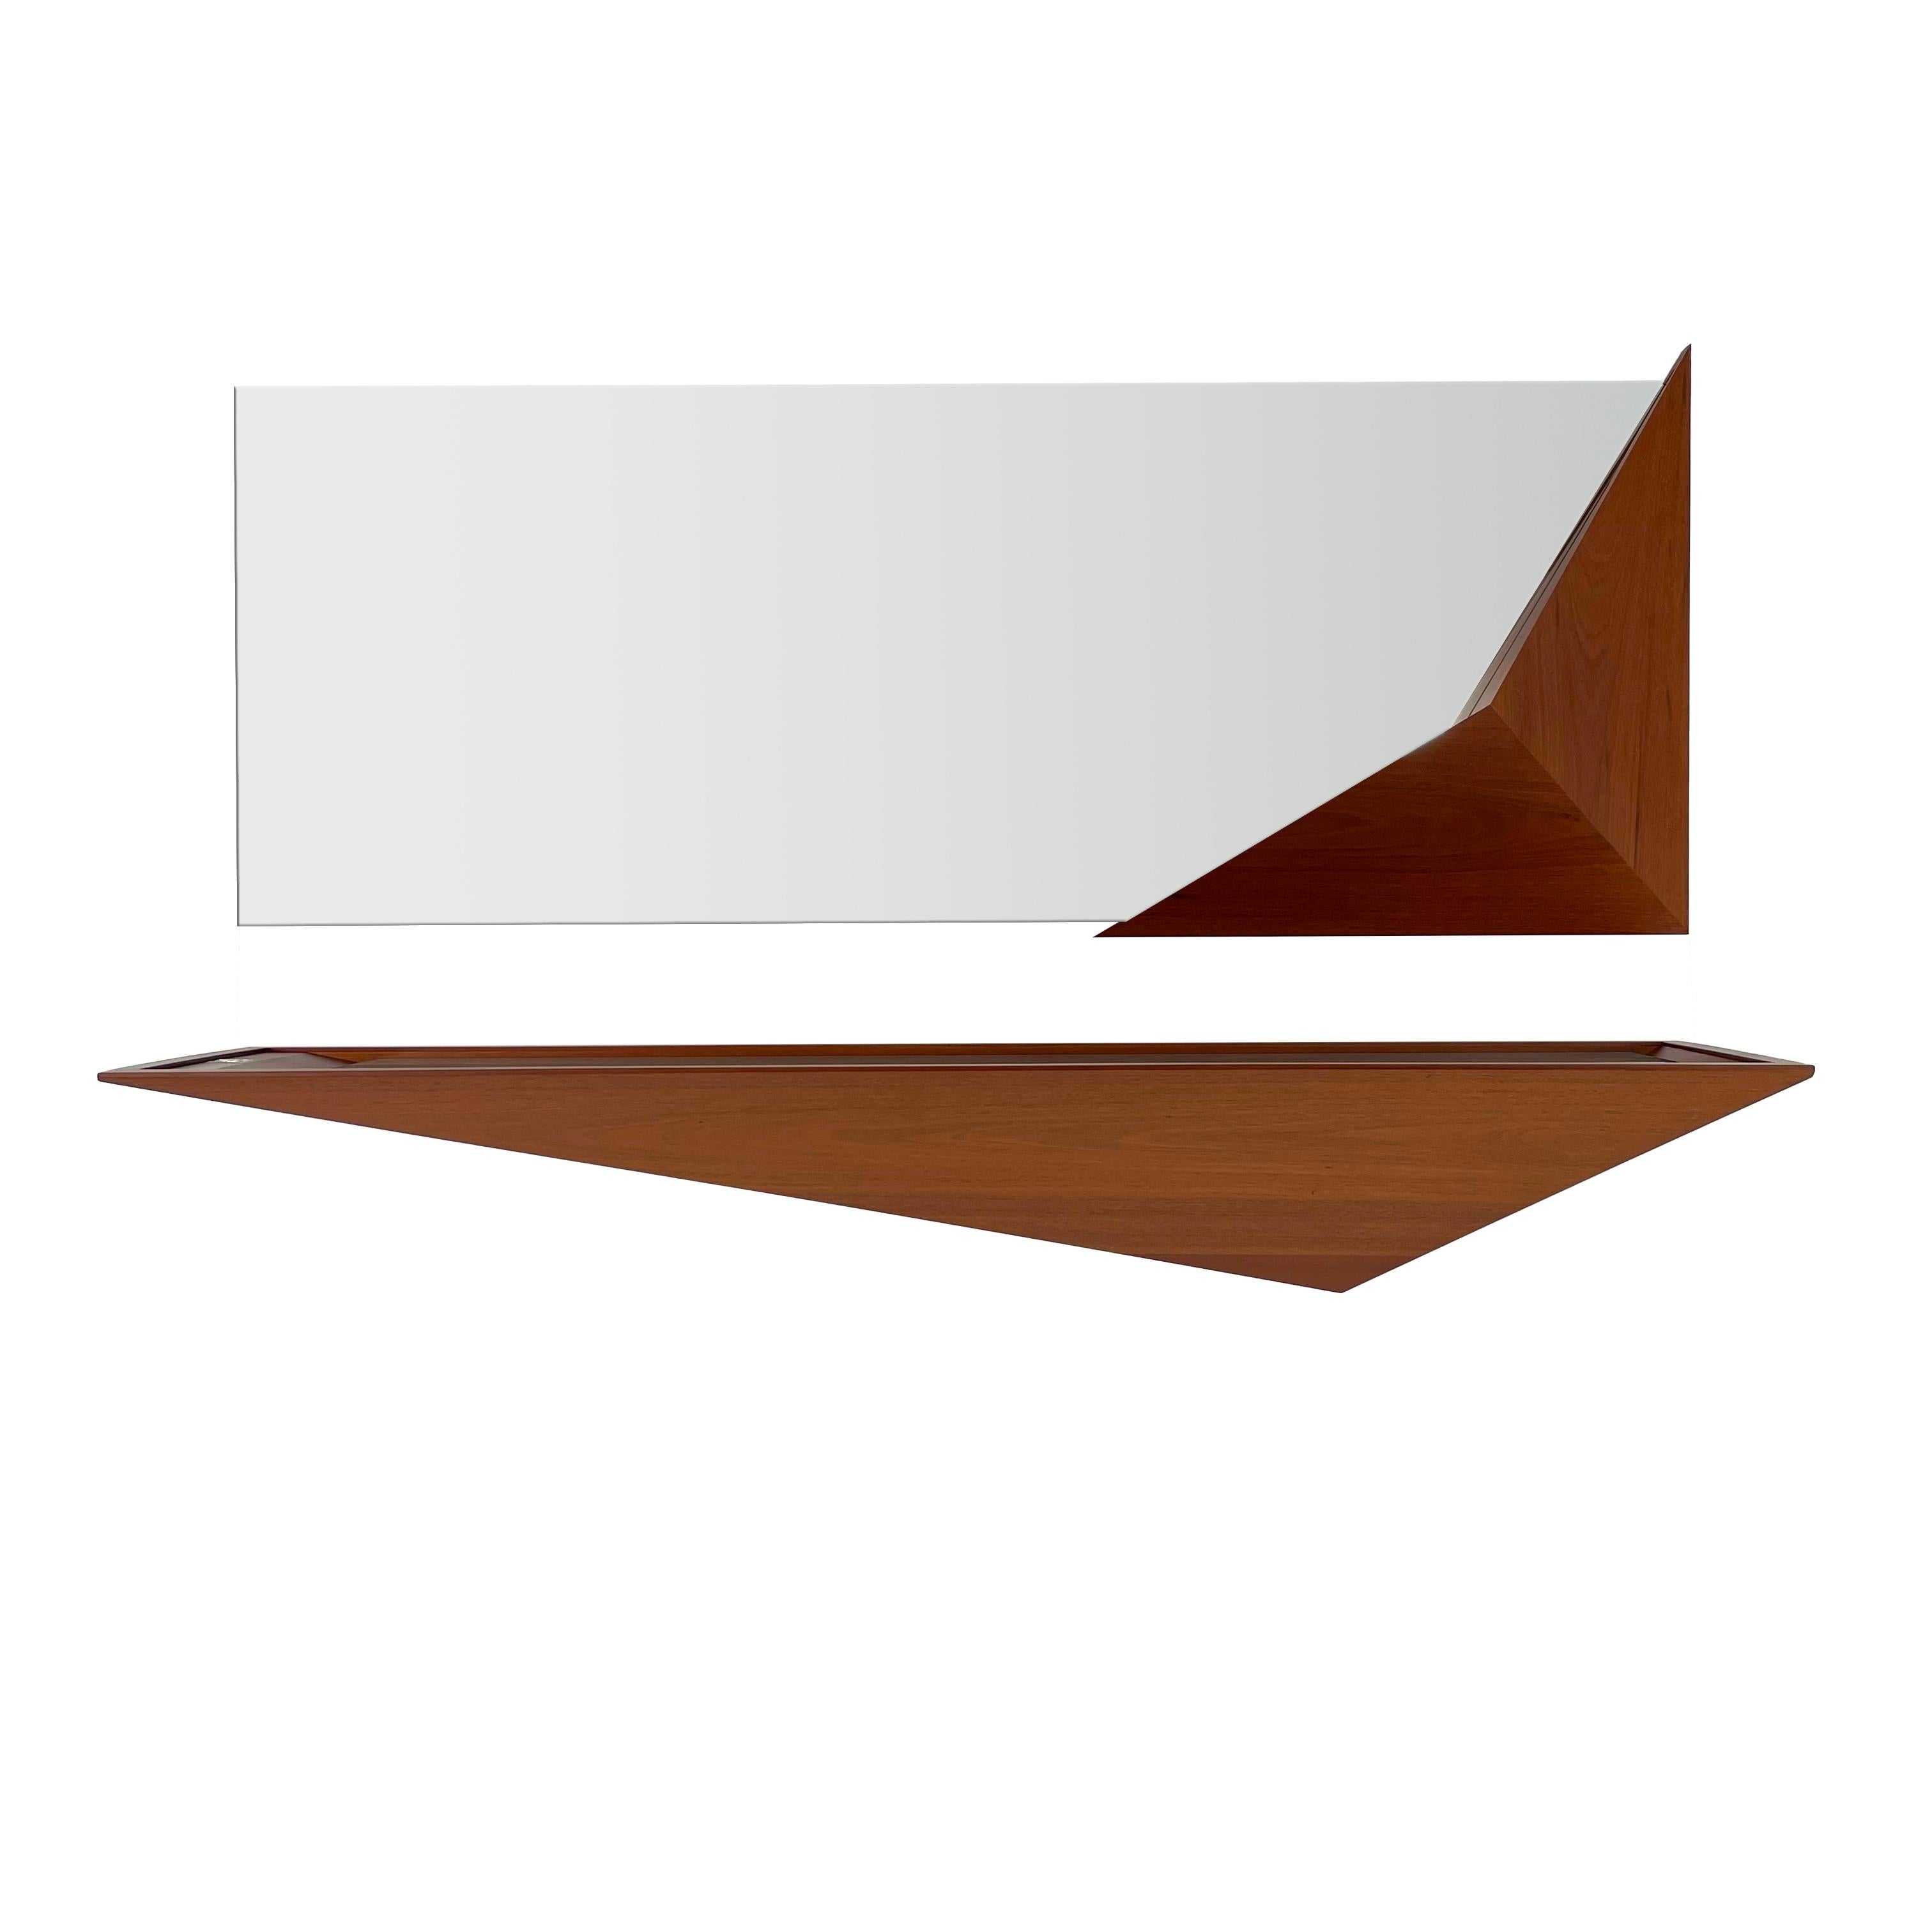 Modern solid wood and glass entry mirror station by Pierre Sarkis from Valentina Collection. Inspired in the Origami Folds theory. Finding in basic geometry meaning of life, truth and beauty. Mirror station for halls and lobbies, sandblast glass